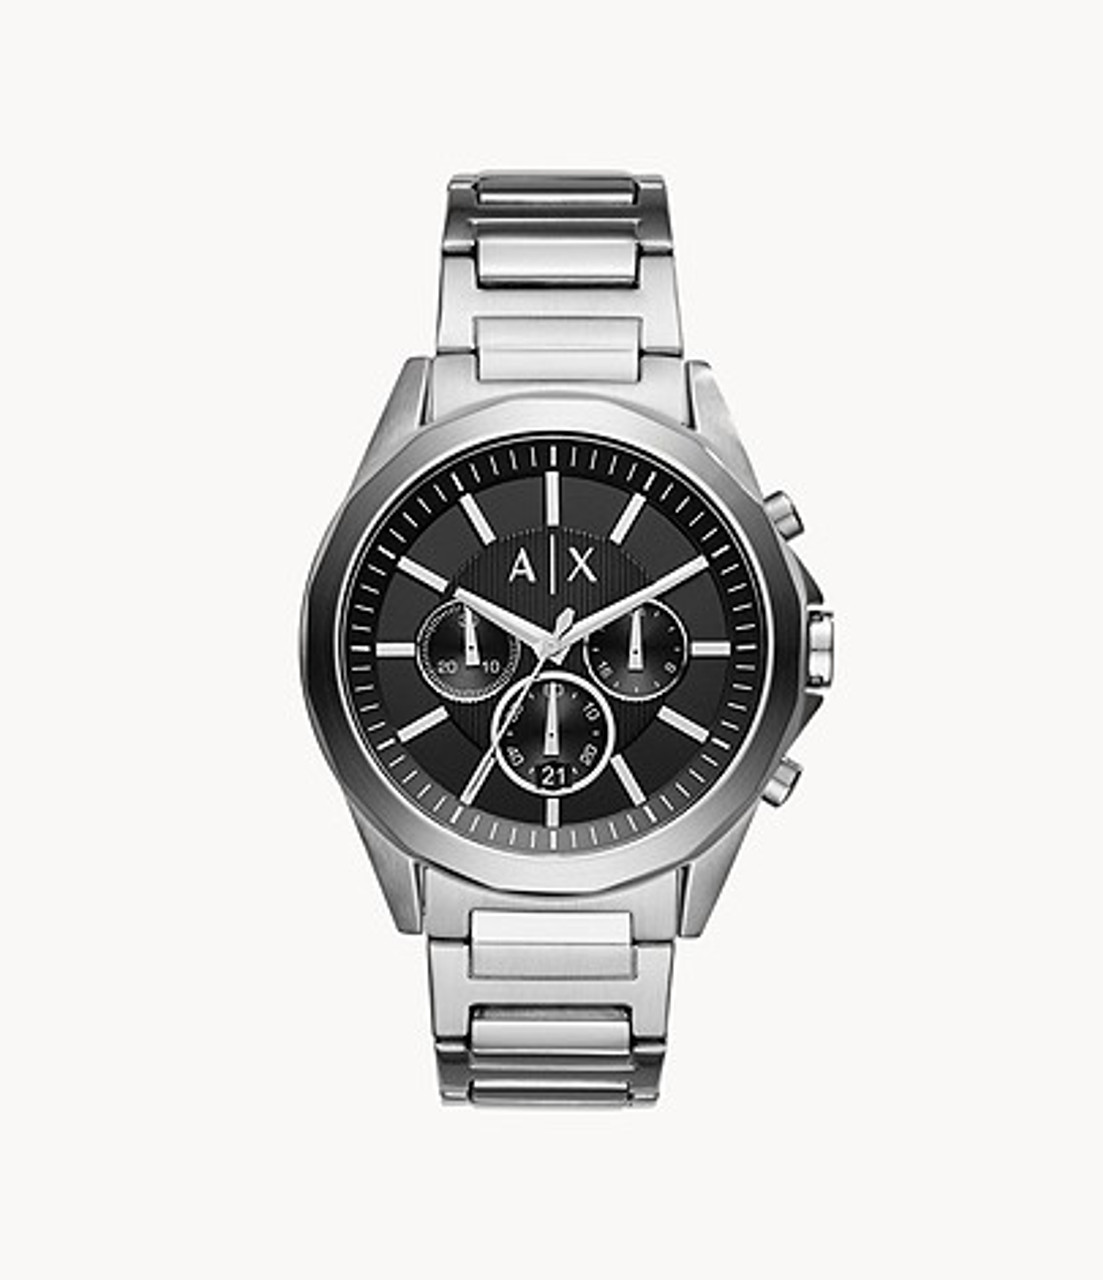 ARMANI EXCHANGE Chronograph Stainless Steel Watch